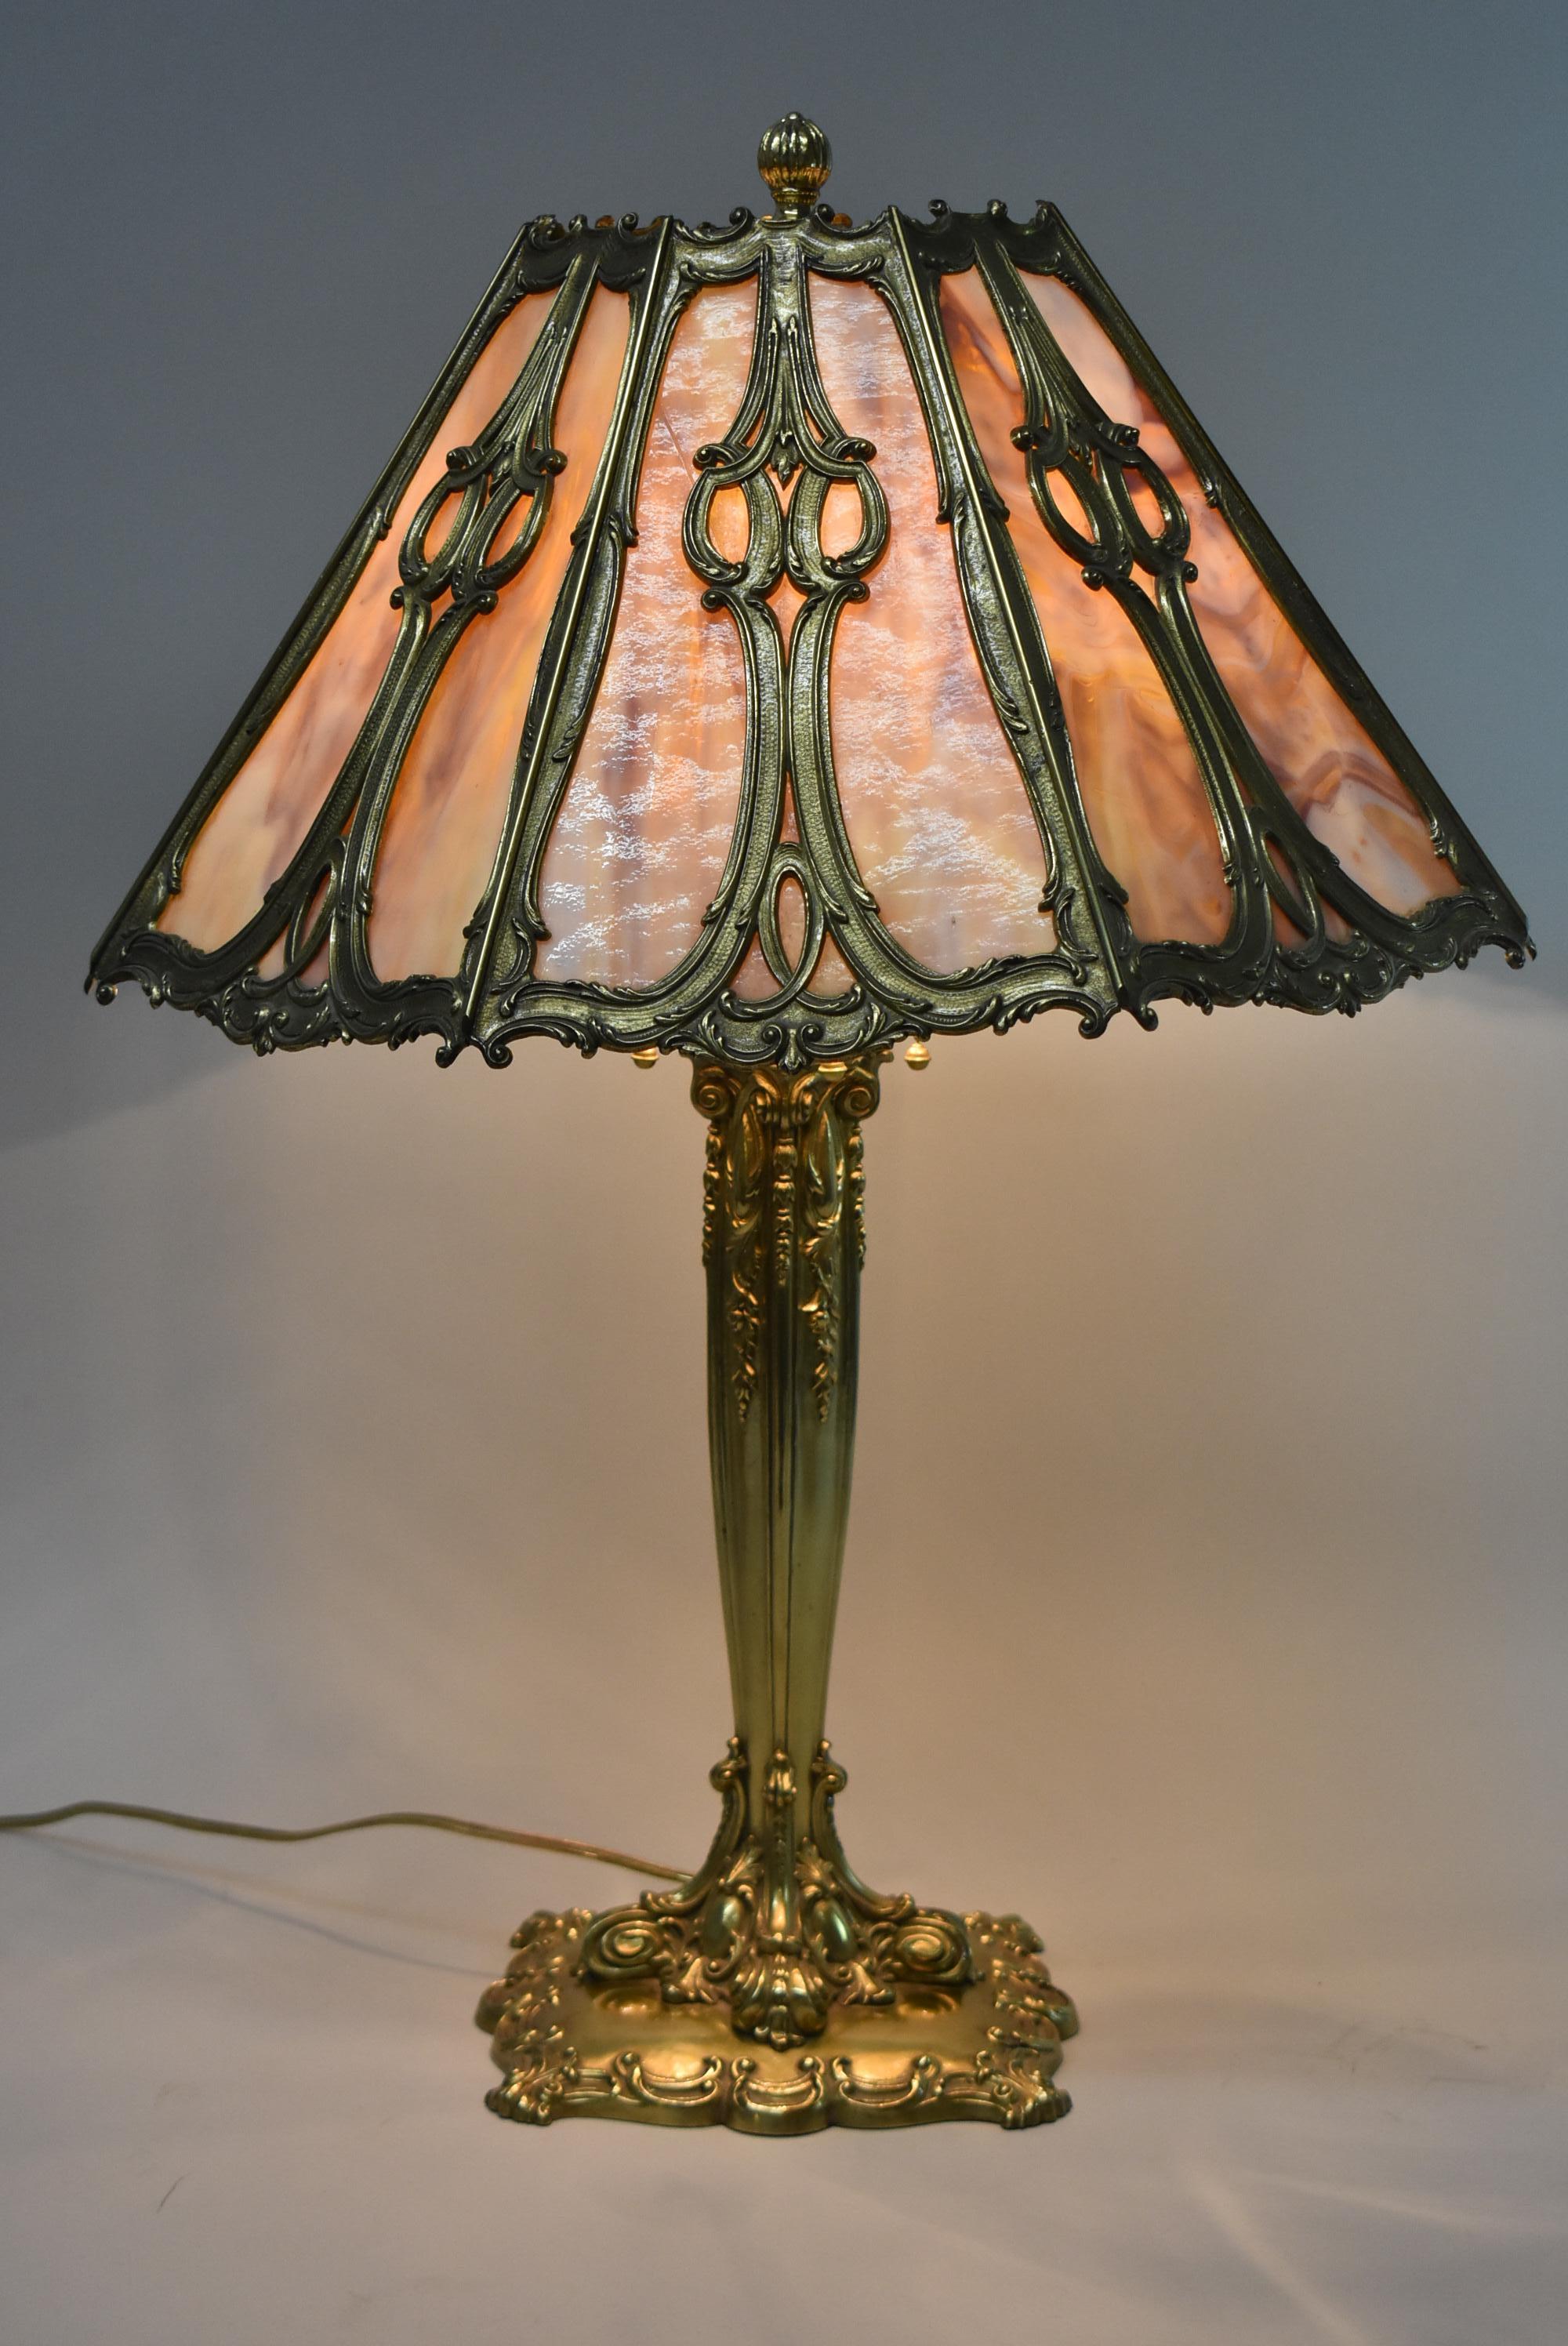 This exceptional lamp by Bradley & Hubbard is dated 1908. The heavy brass base has 4 Bryant sockets with acorn pulls. The base is signed on the underside. There are no breaks in the shade and the piece has been rewired. 18